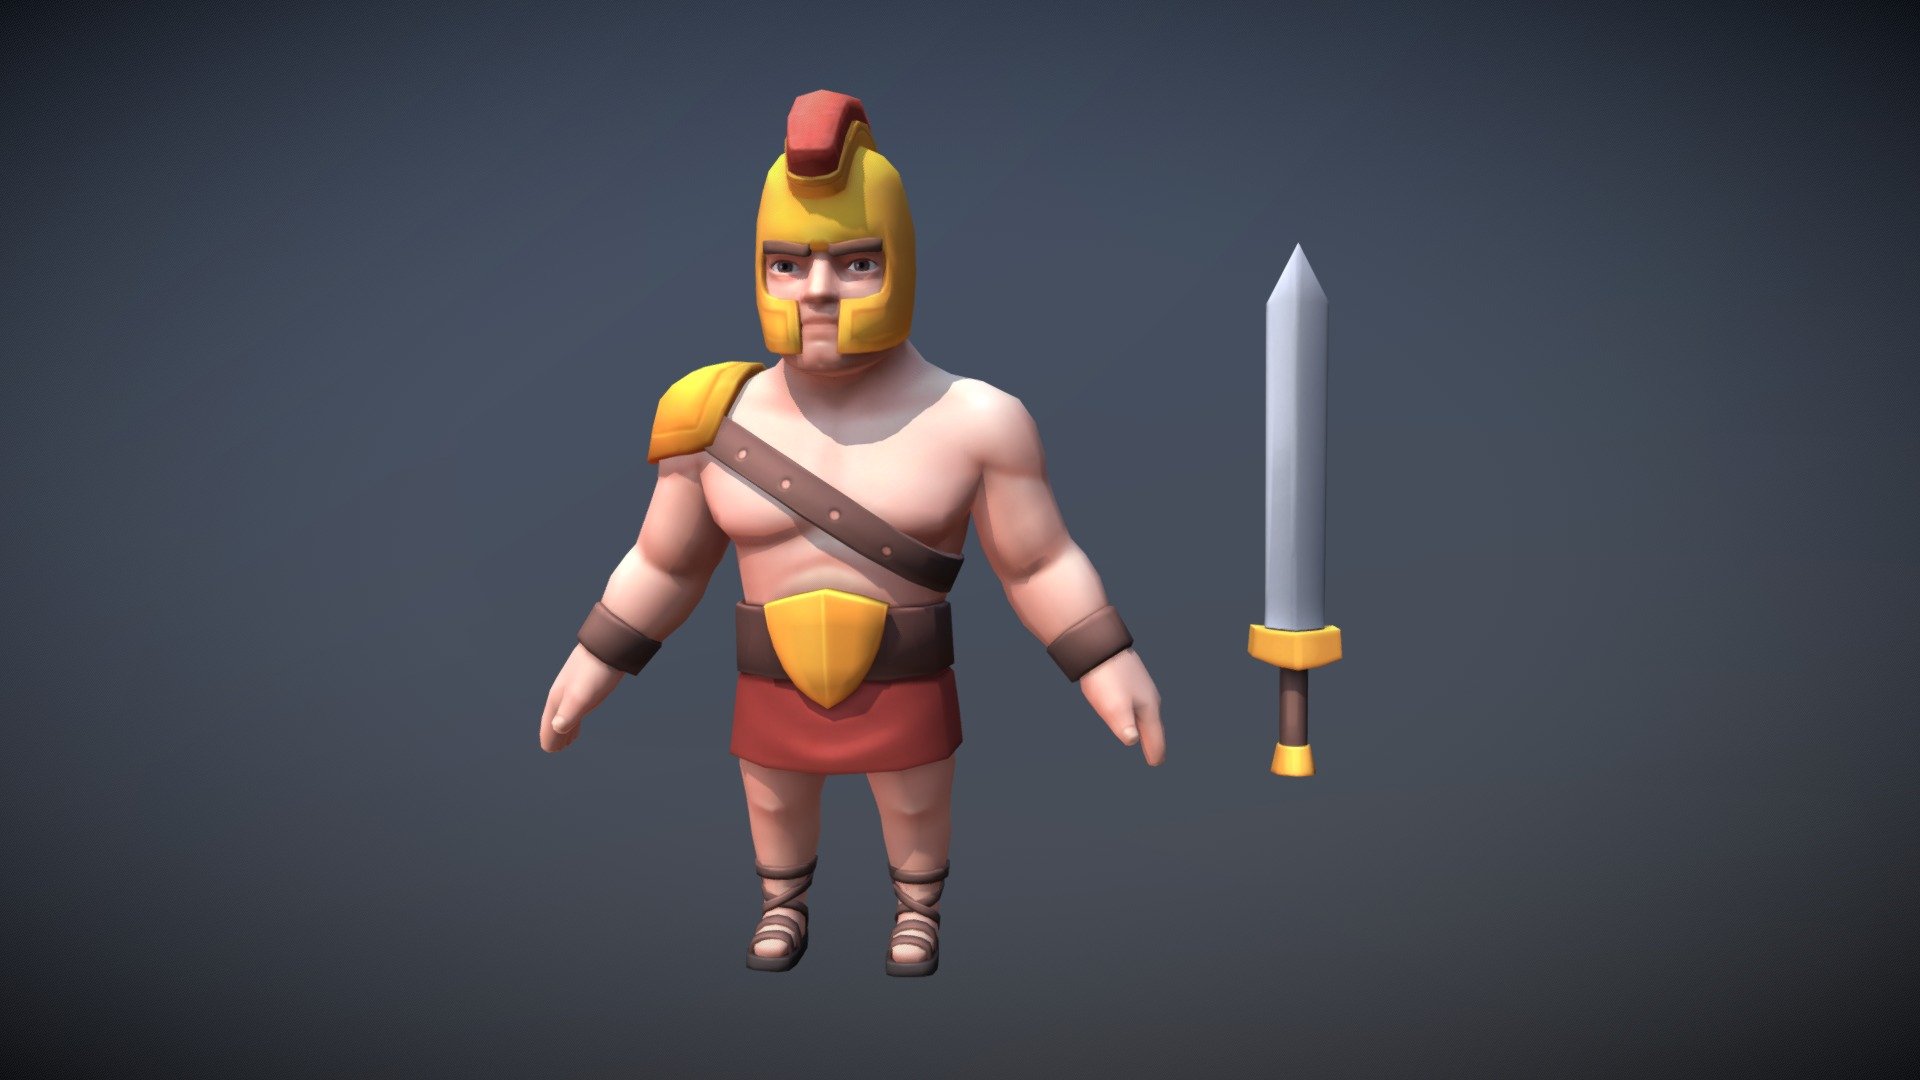 Low Poly Warrior Character for Unity Asset store.
Visit our webpage, for more 3d models: https://polysquid.com/ - Low Poly Warrior Character - 3D model by PolySquid (@PolySquid_Studios) 3d model